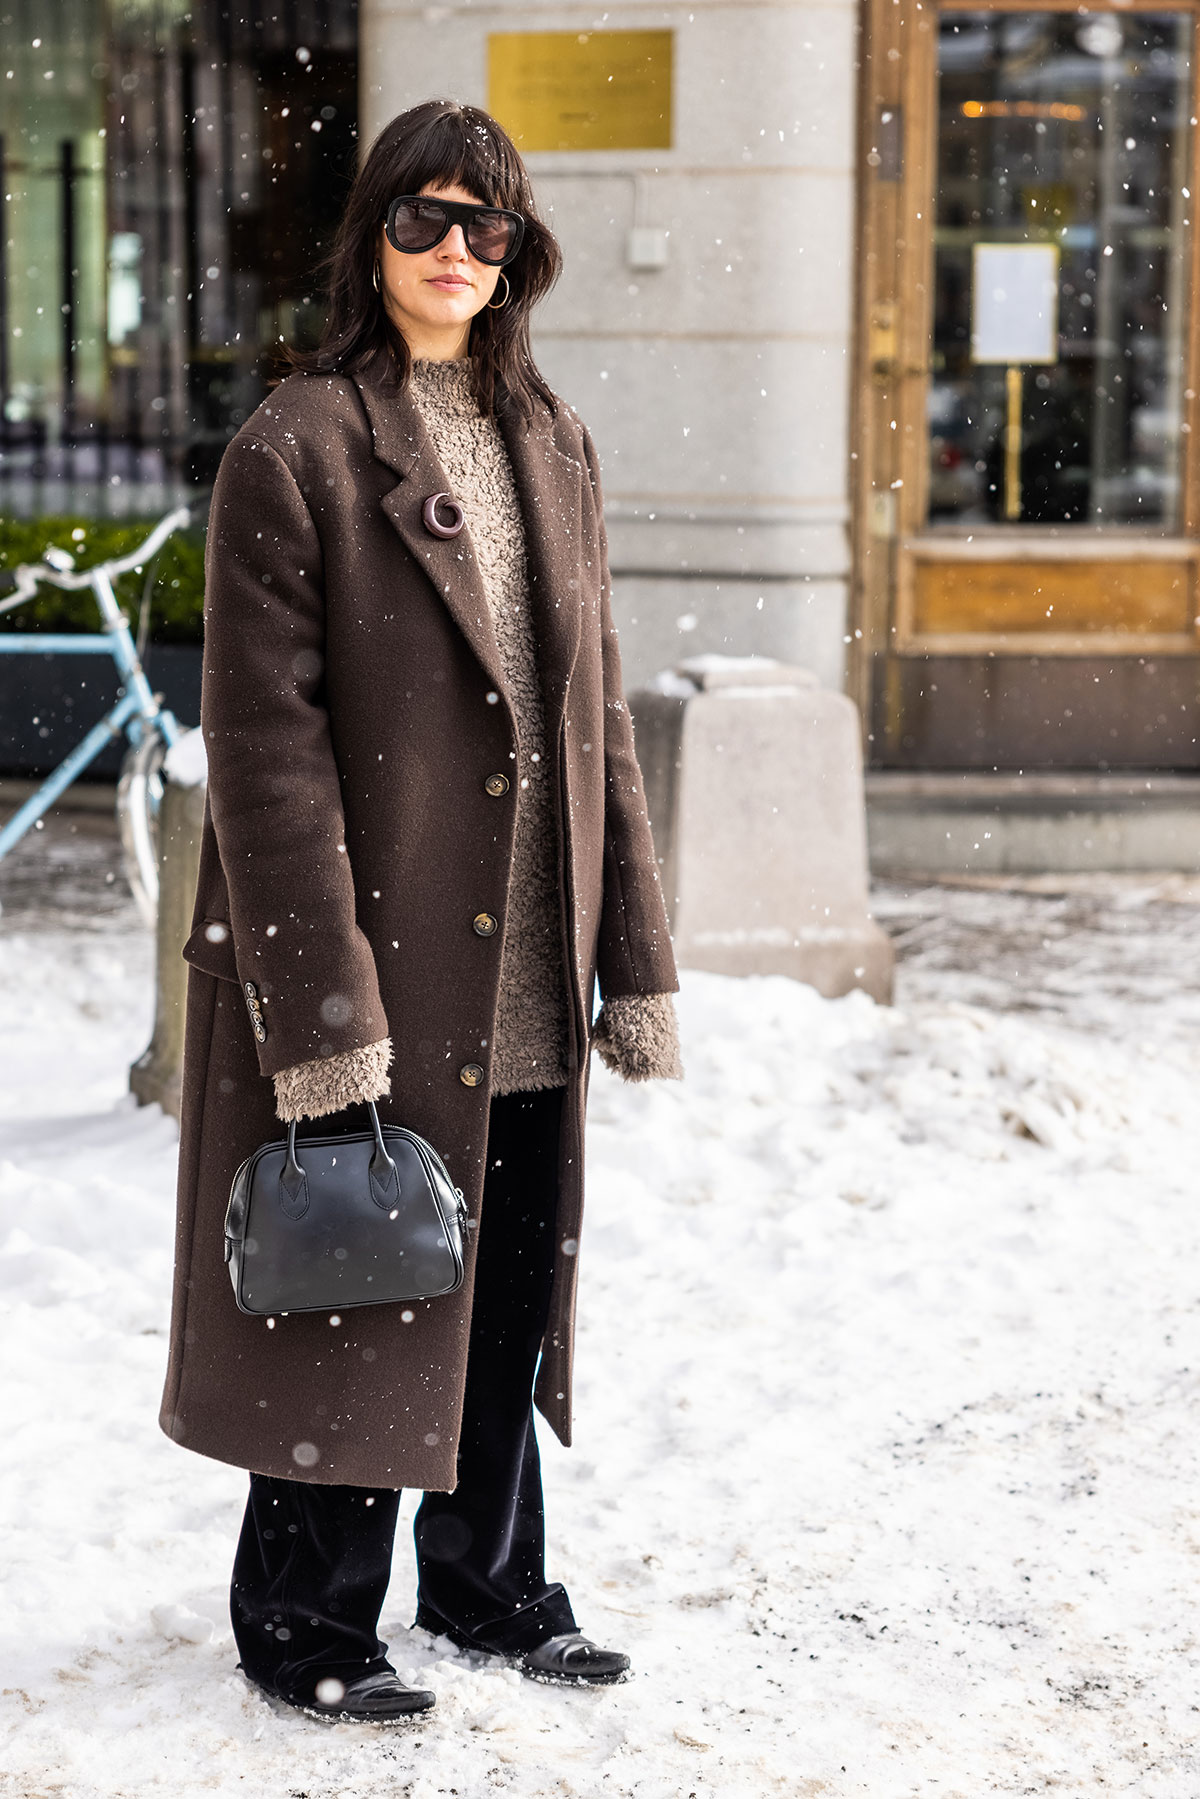 SEE: Winter street styles from Stockholm - Rediff.com Get Ahead